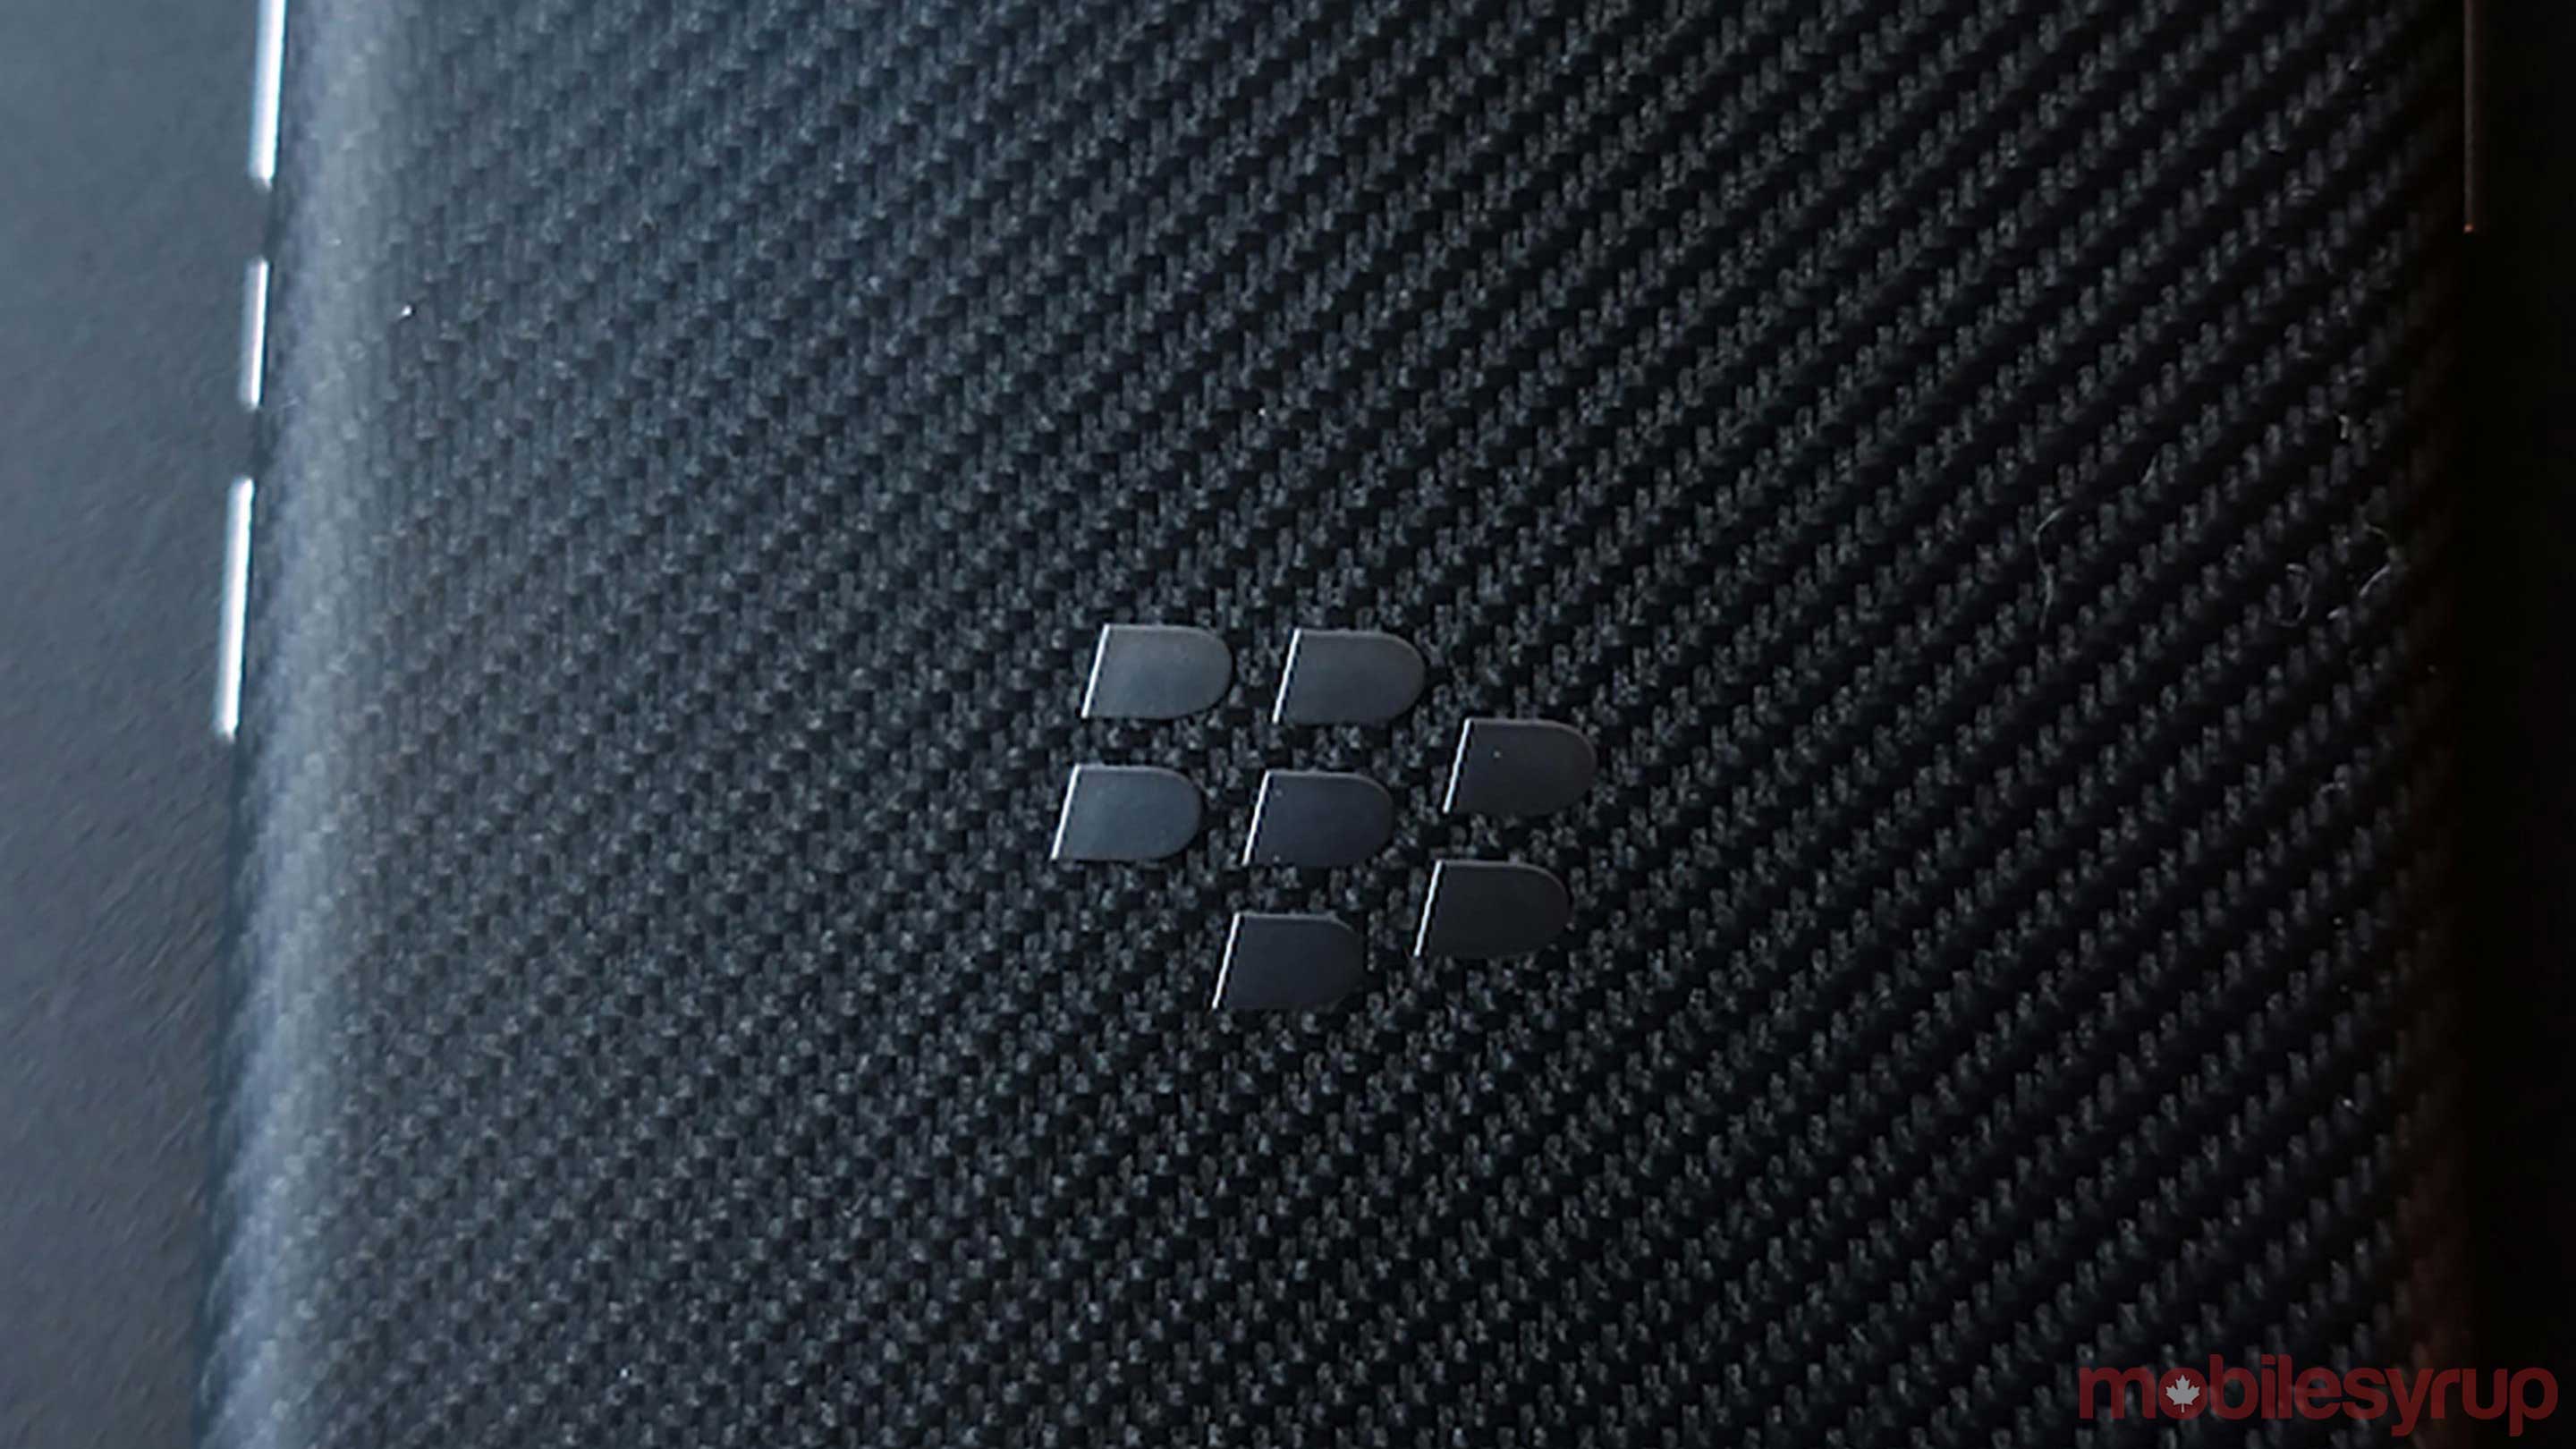 Blackberry Android Users Get Dark Theme For Hub In Latest Update